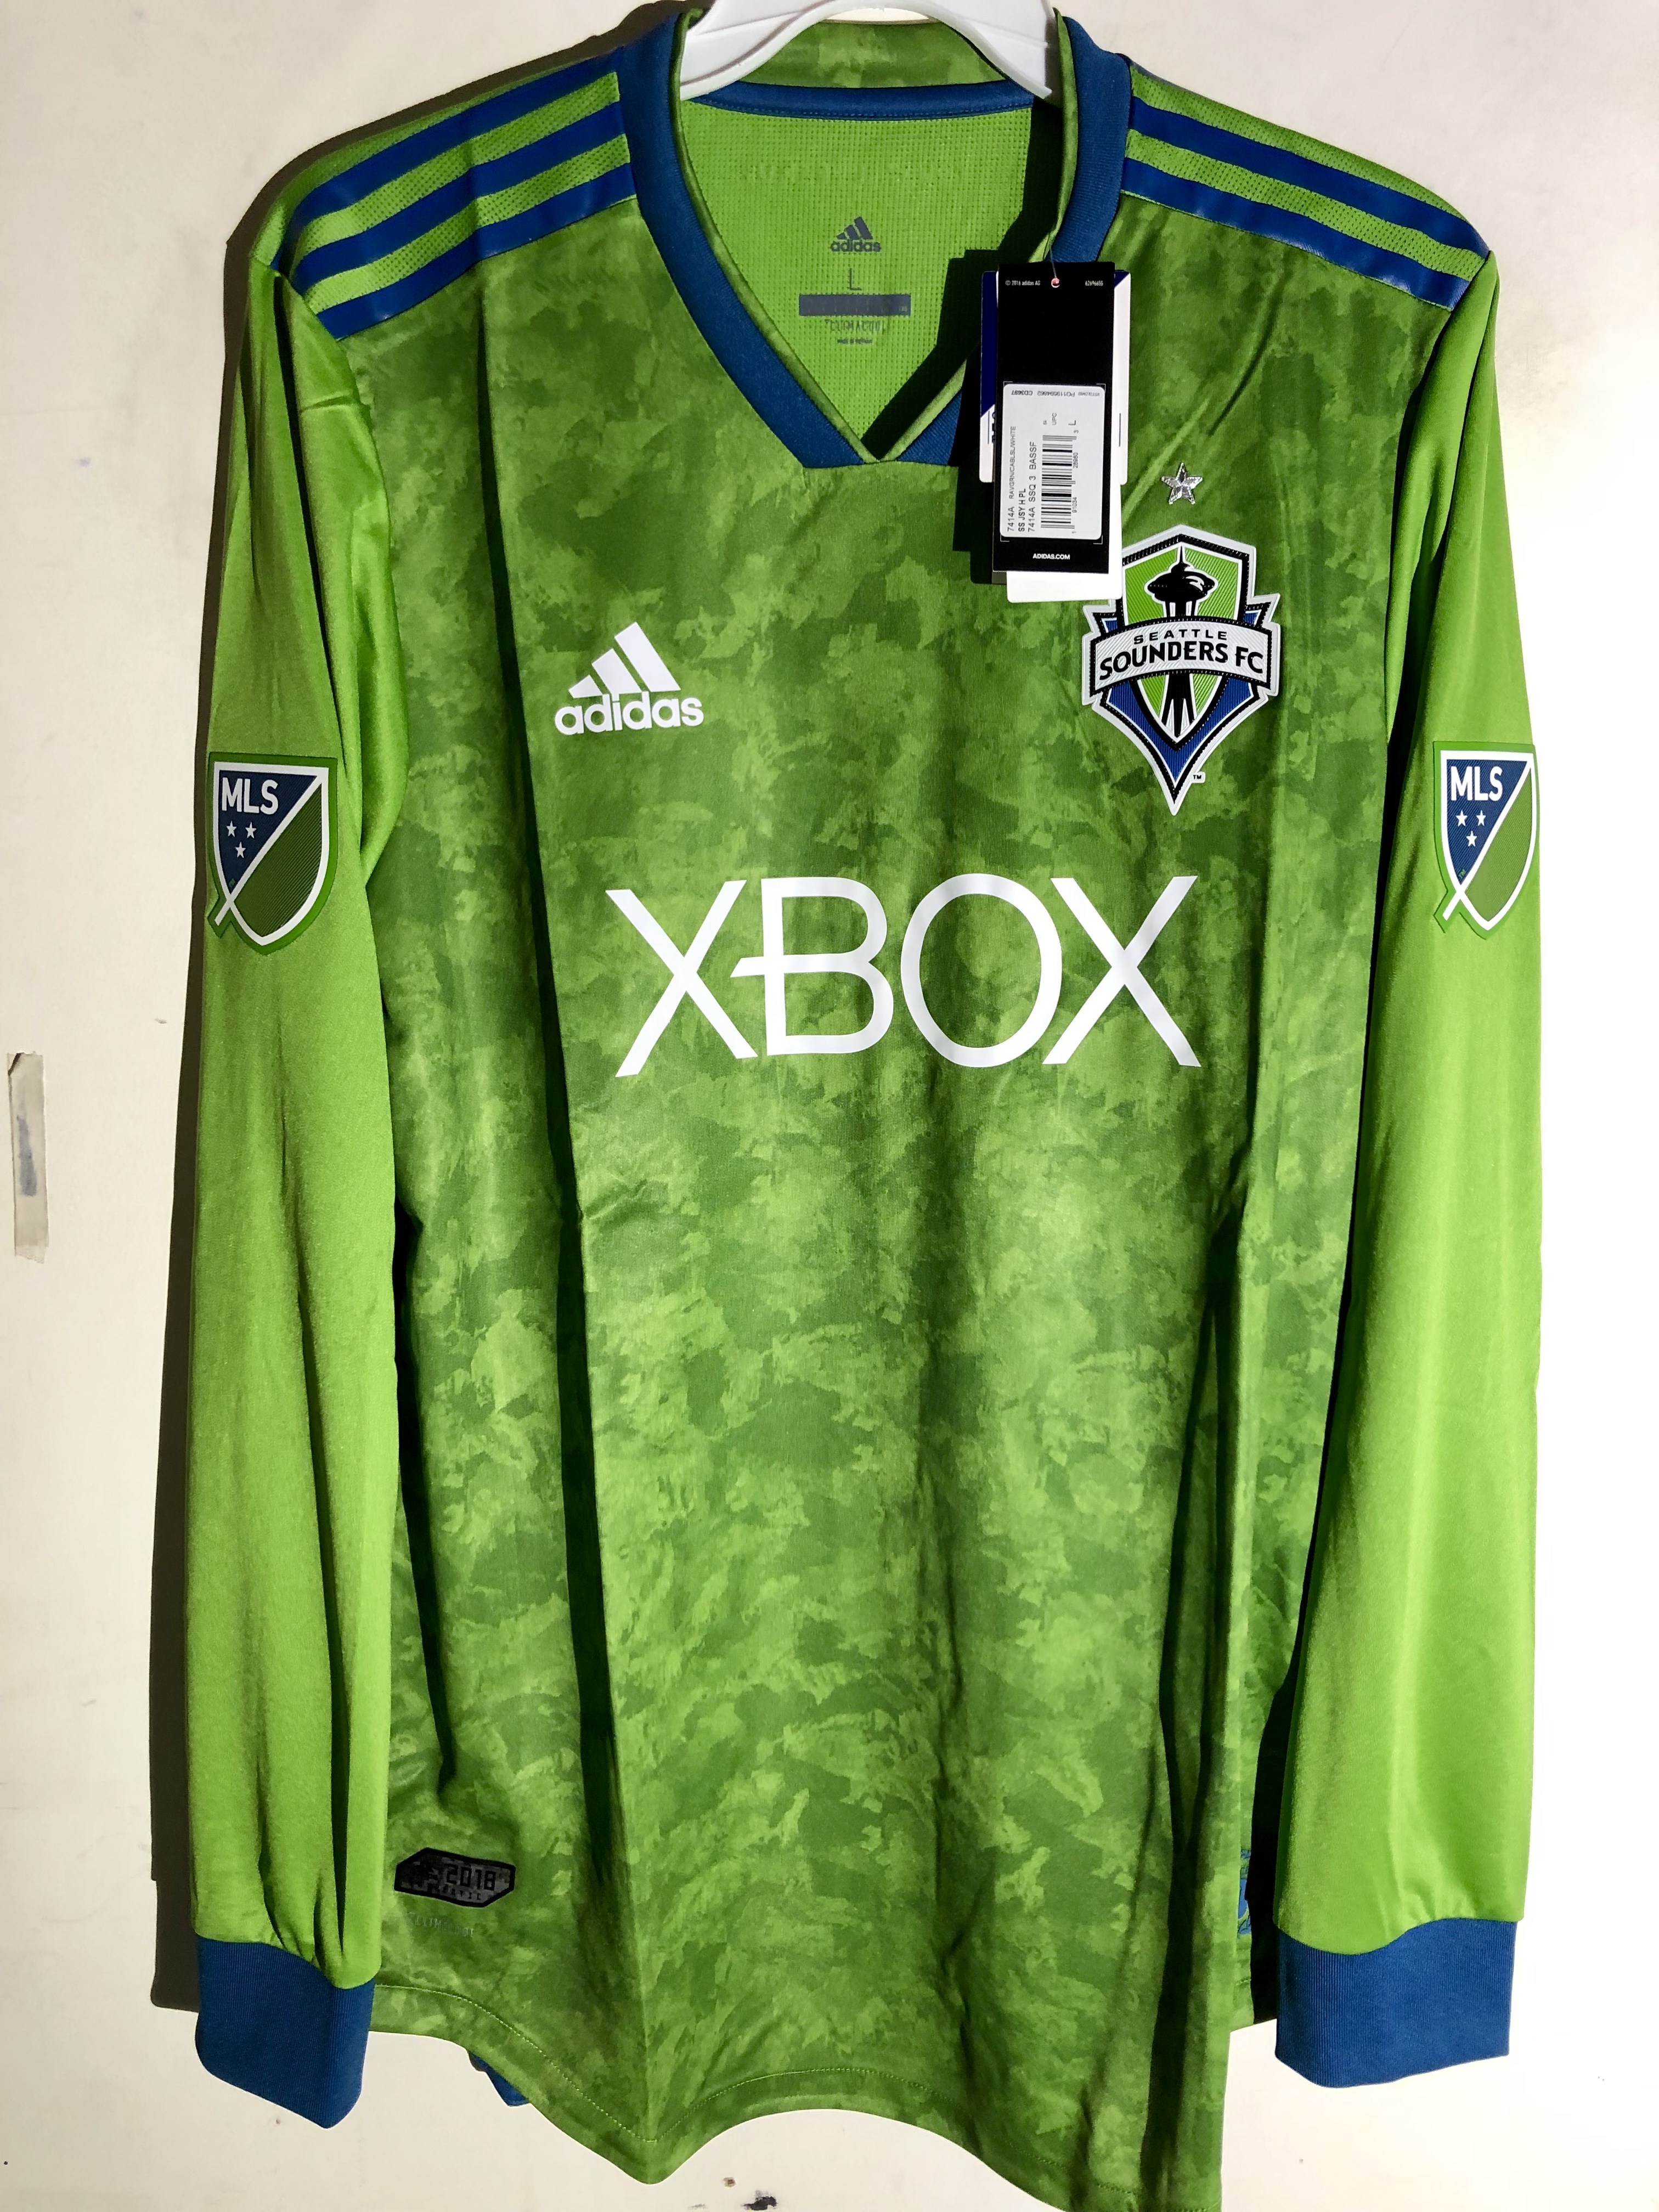 Sounders FC to participate in collaborative effort with adidas